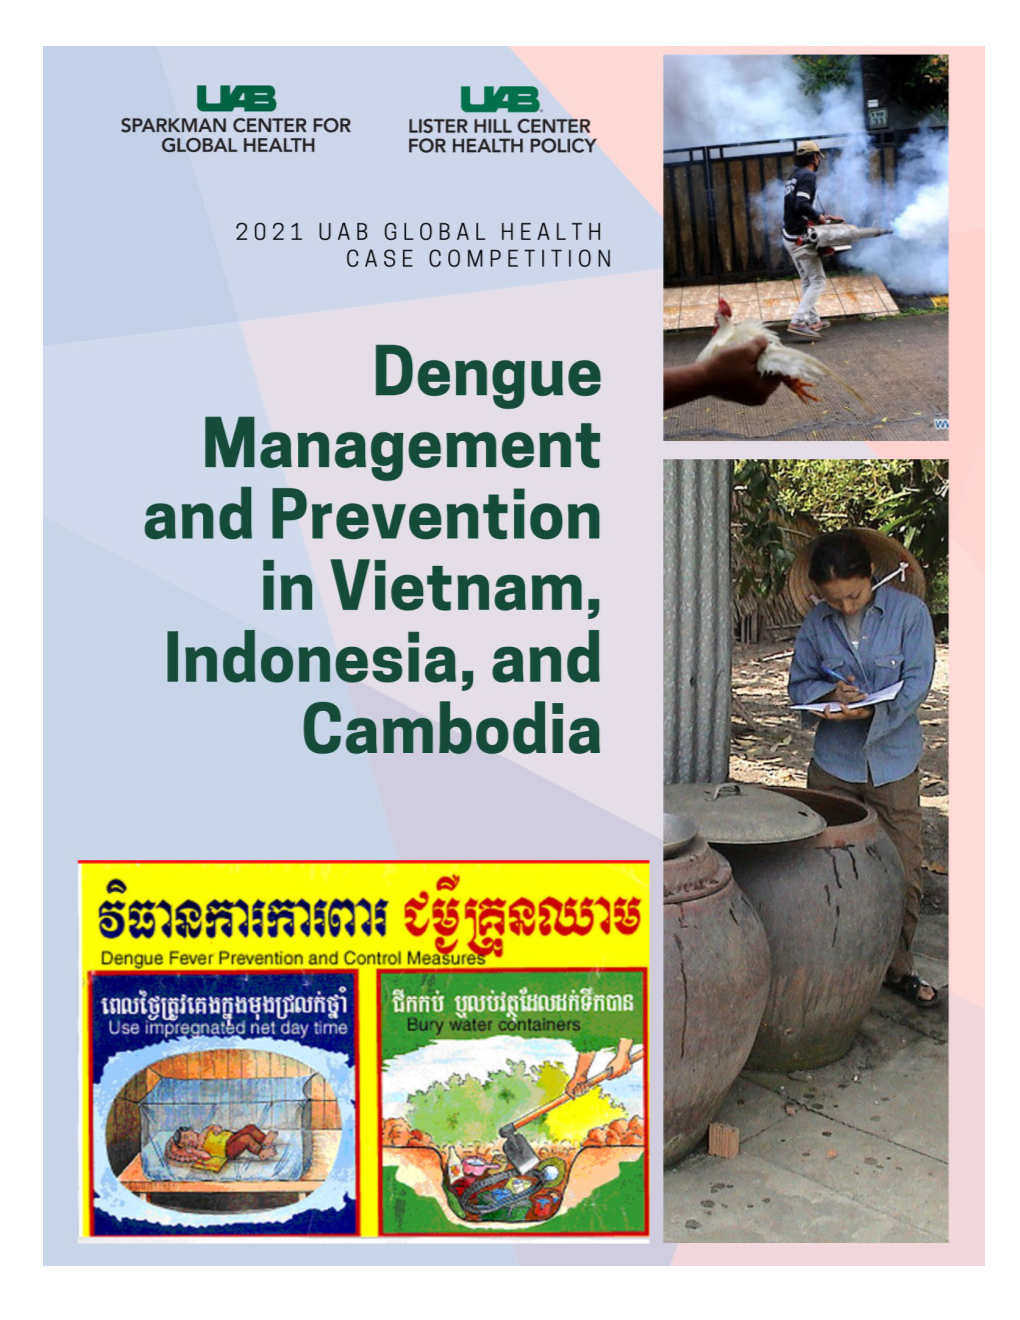 Dengue Management and Prevention in Vietnam, Indonesia And